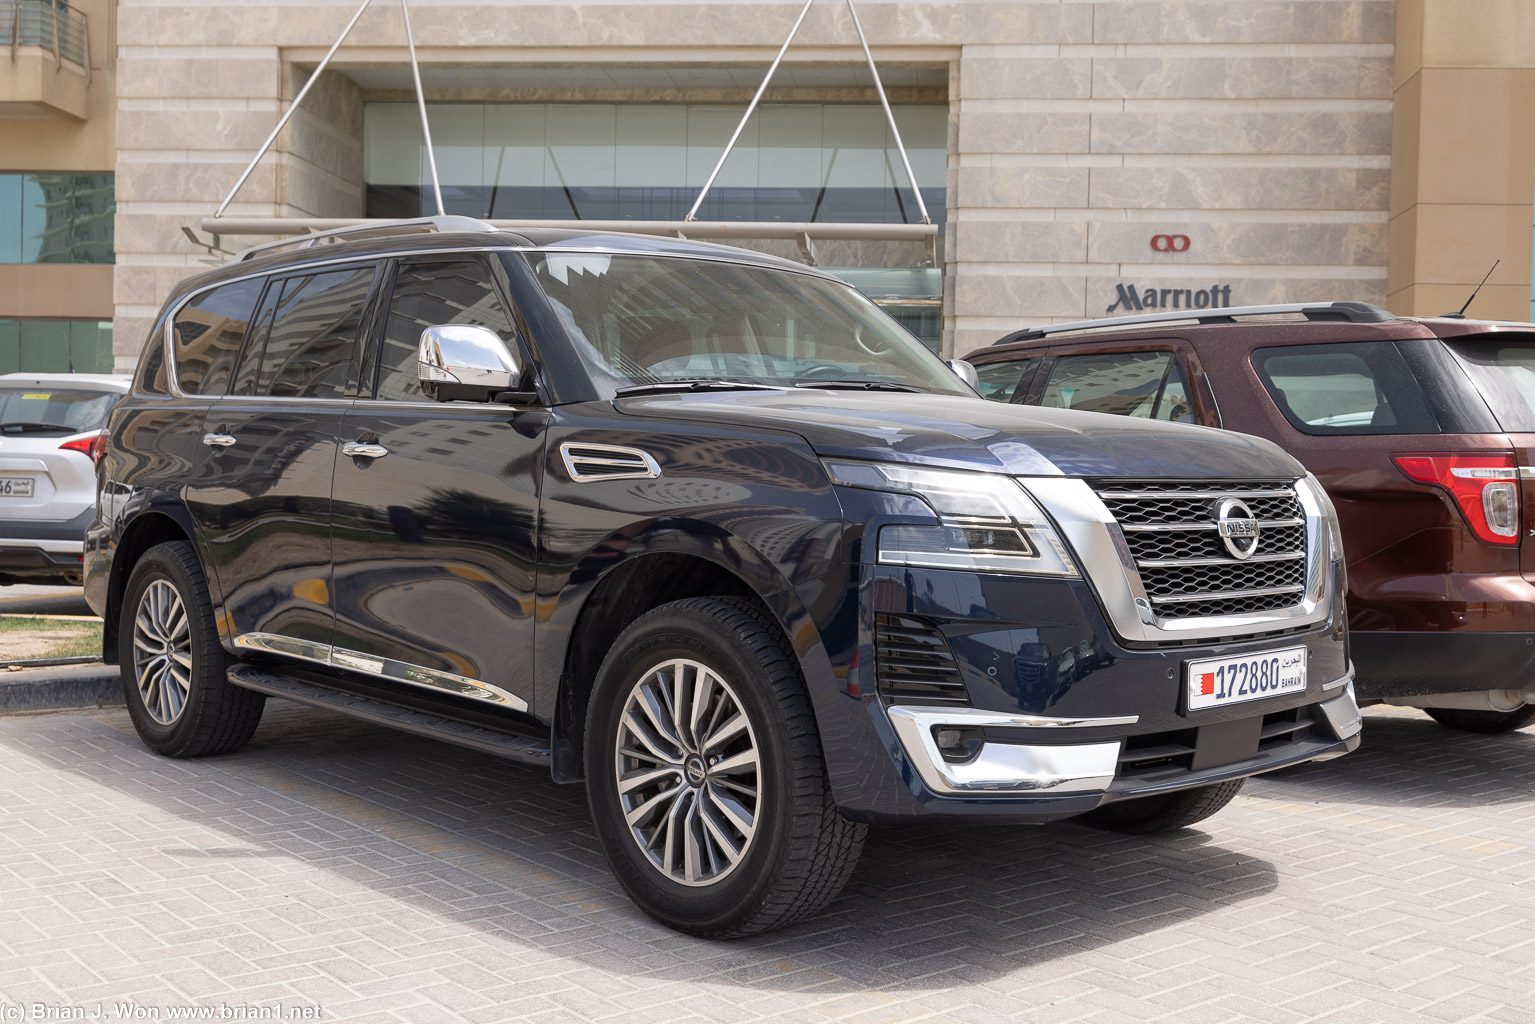 Nissan Patrol is a very, very popular vehicle in the Middle East, unlike back home where it's decidedly unloved (as the QX80/Armada).